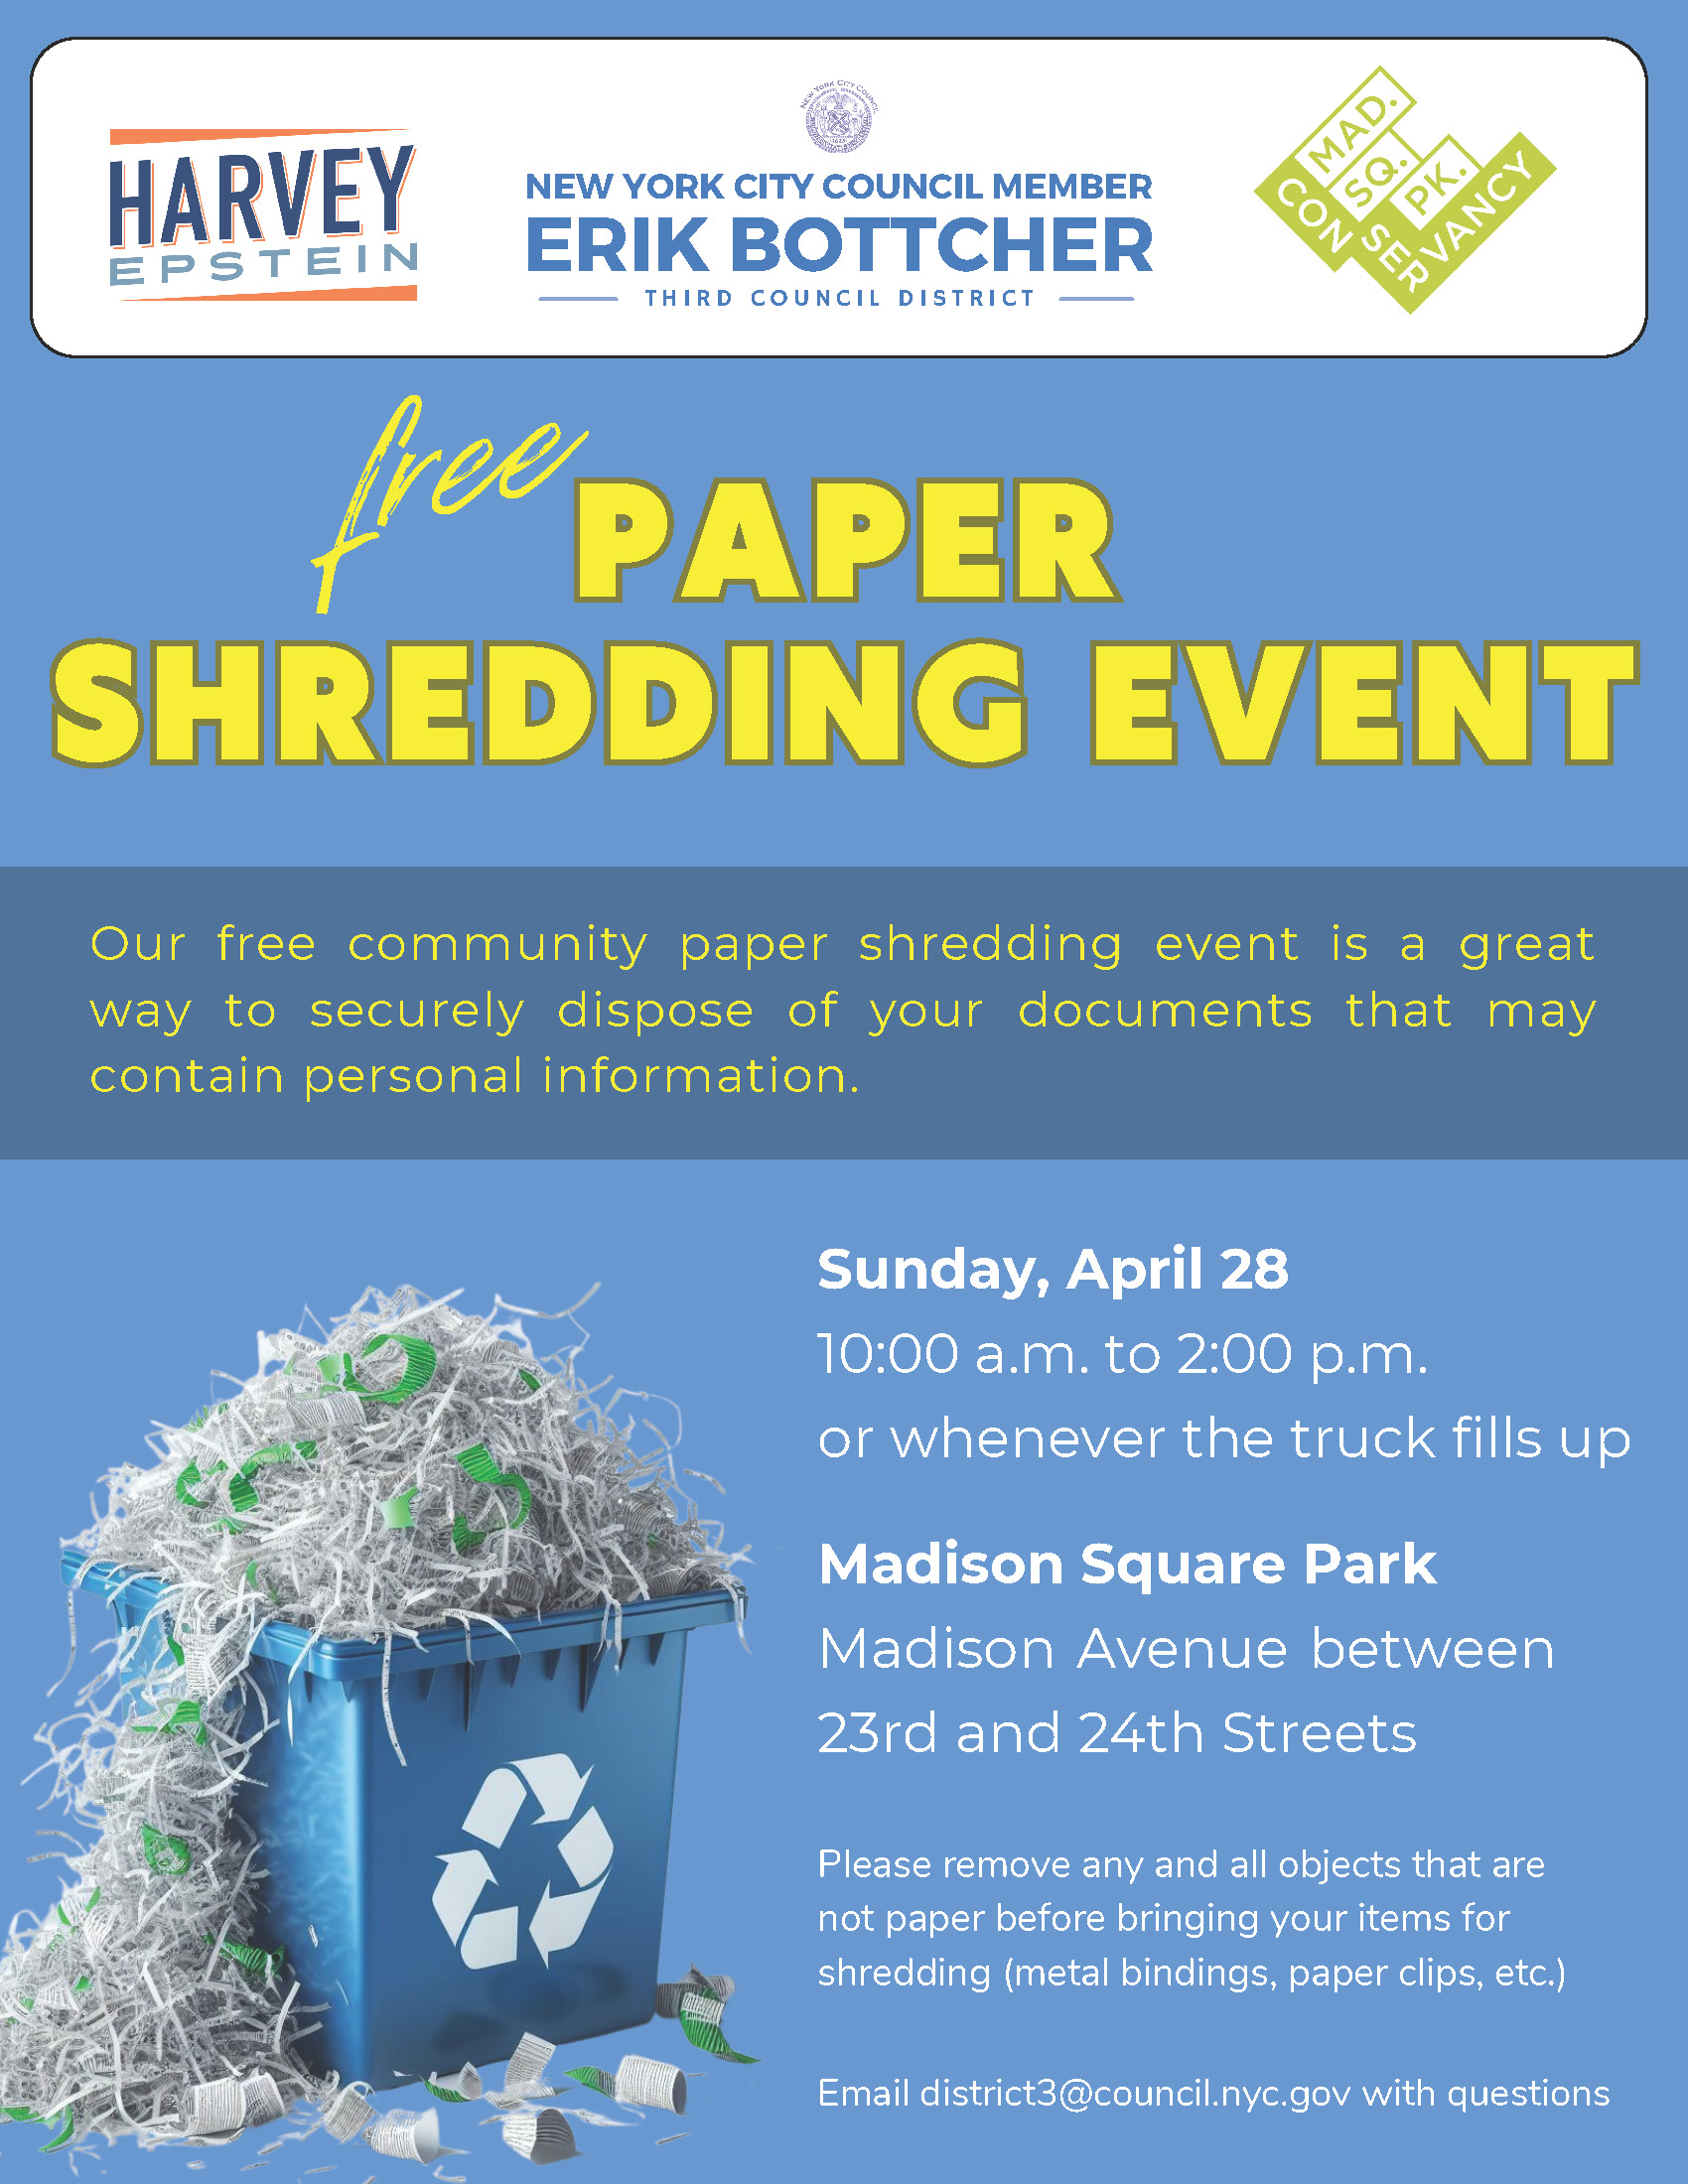 Flyer that reads: Free Paper Shredding Event  Sunday, April 28  10:00AM - 2:00PM (or whenever the truck is full)  Madison Square Park, Madison Avenue, Between 23rd & 24th Streets  This event is a great way to securely dispose of your documents that may contain personal information.